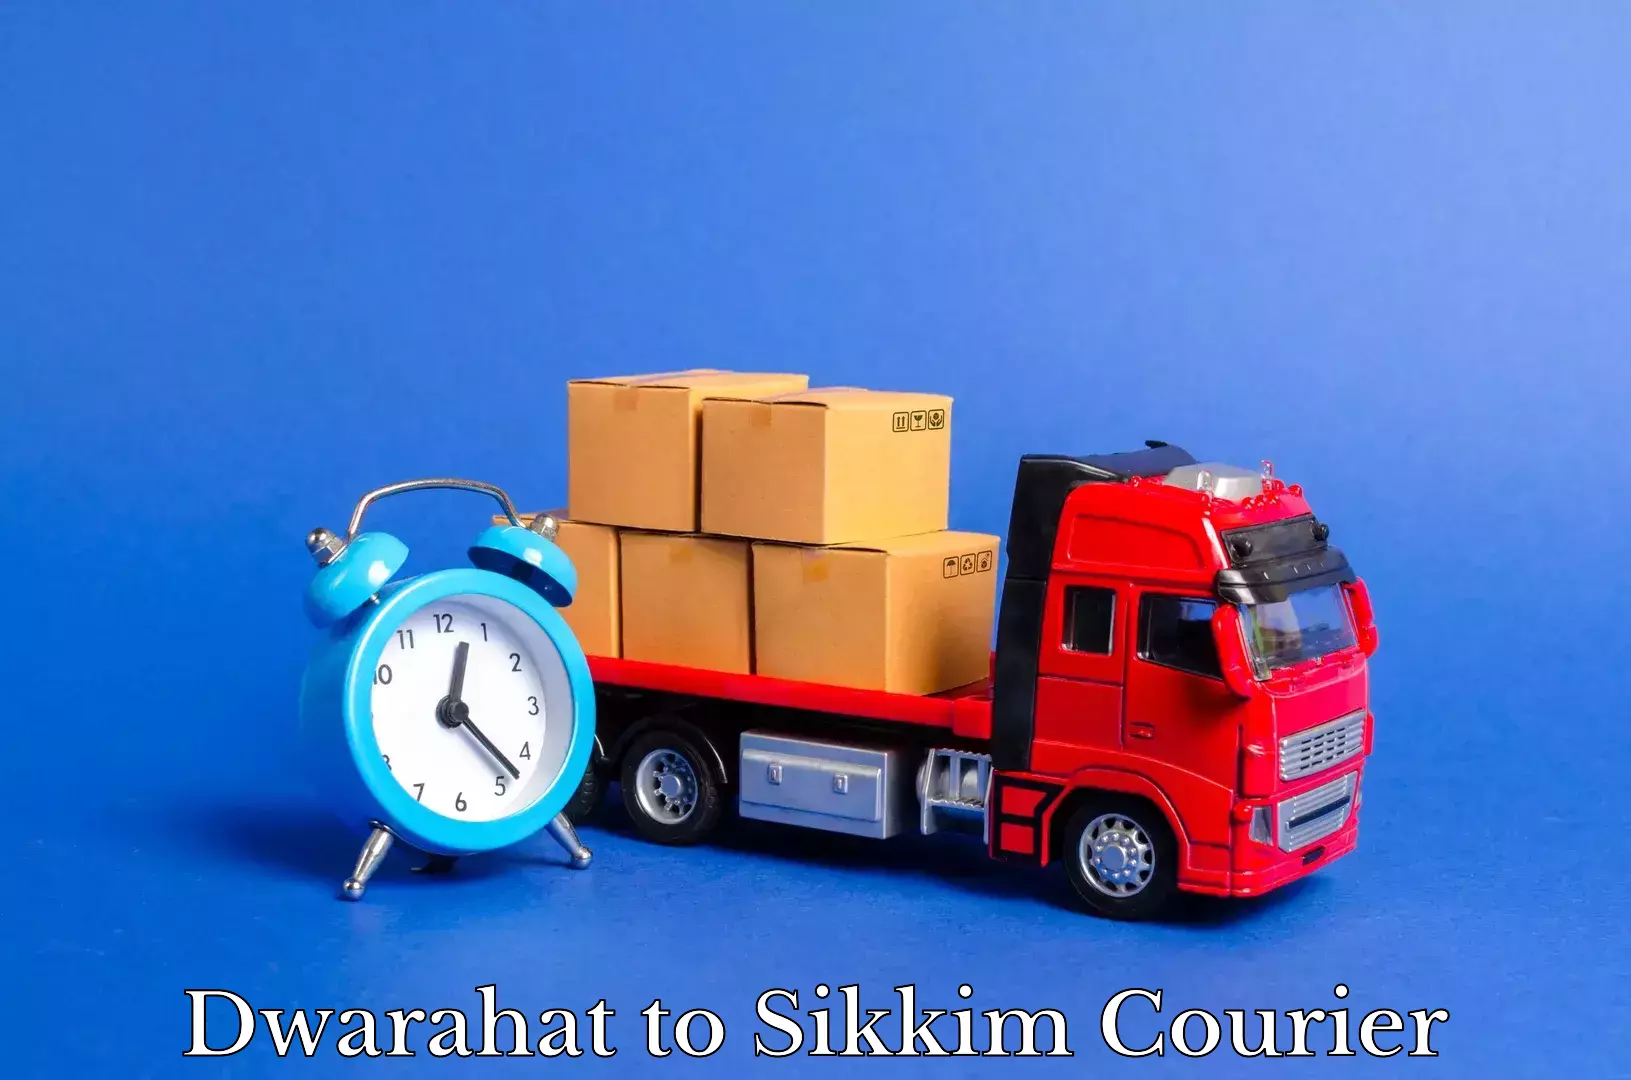 Furniture transport solutions in Dwarahat to Pelling